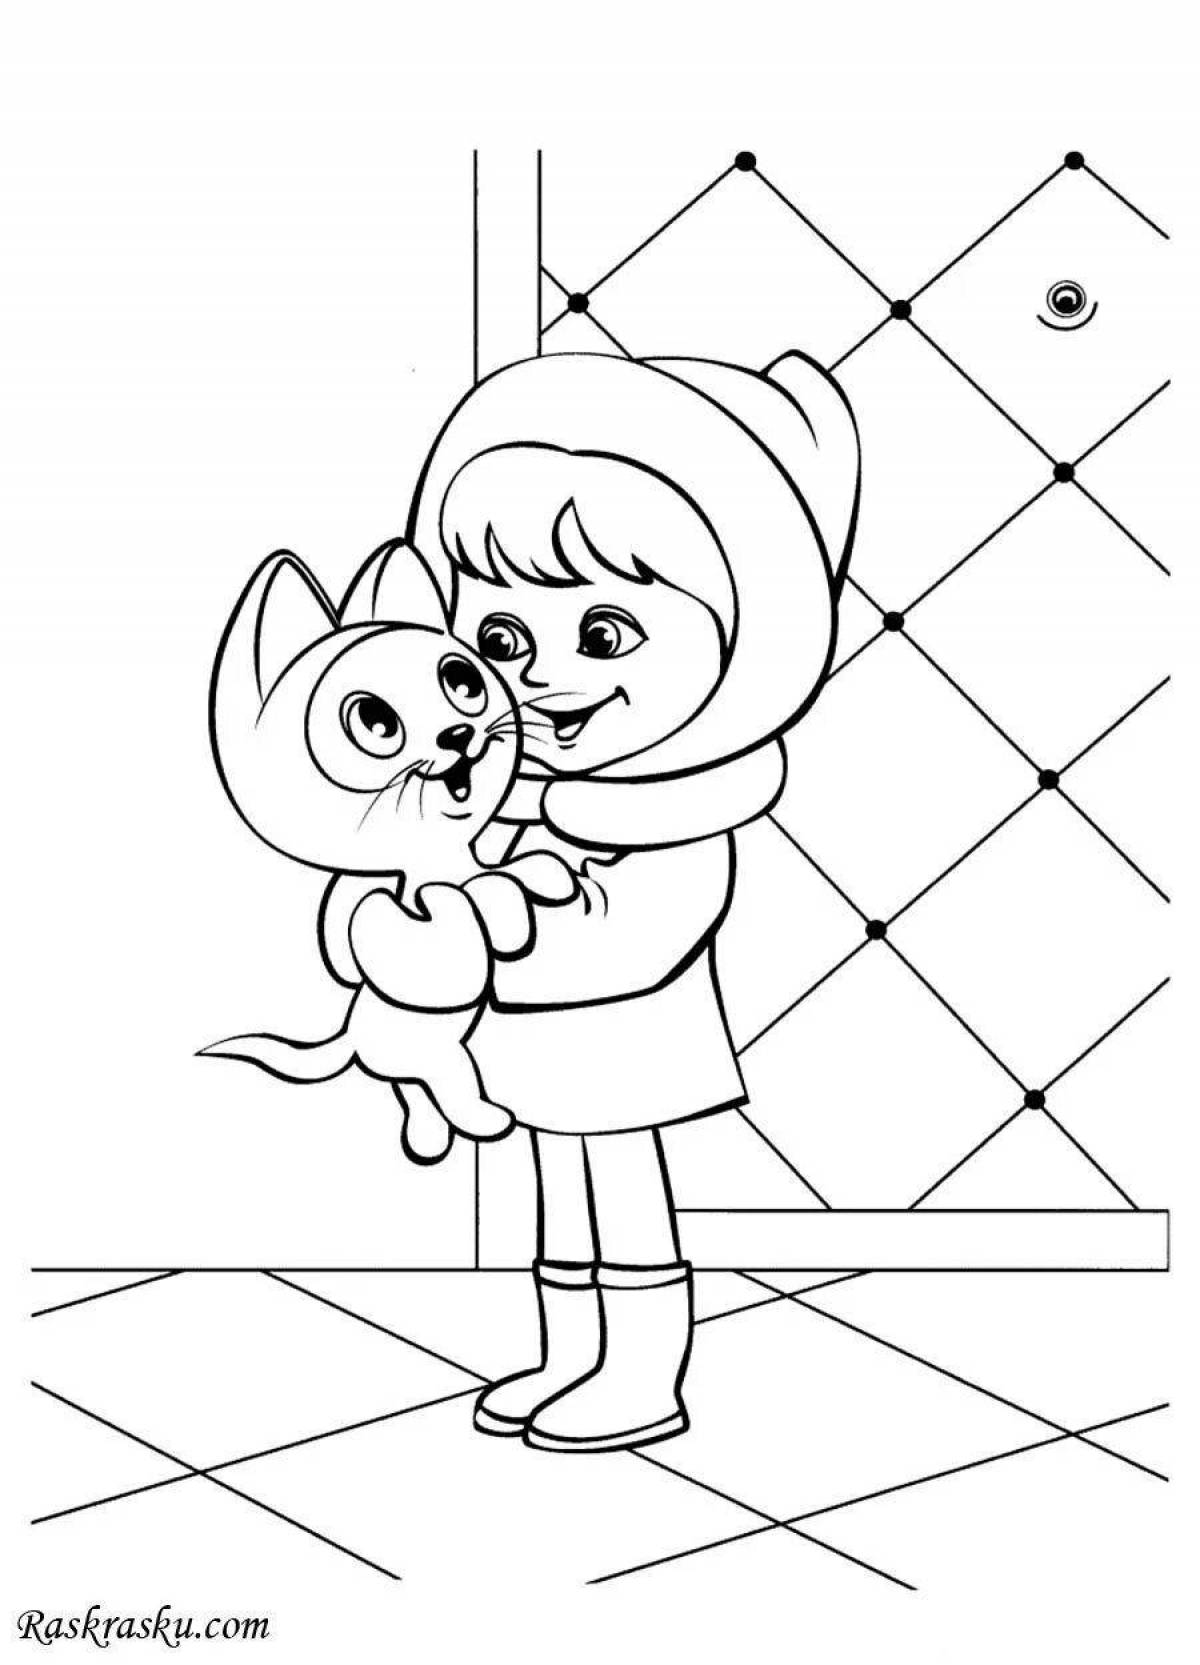 Fat woof coloring page